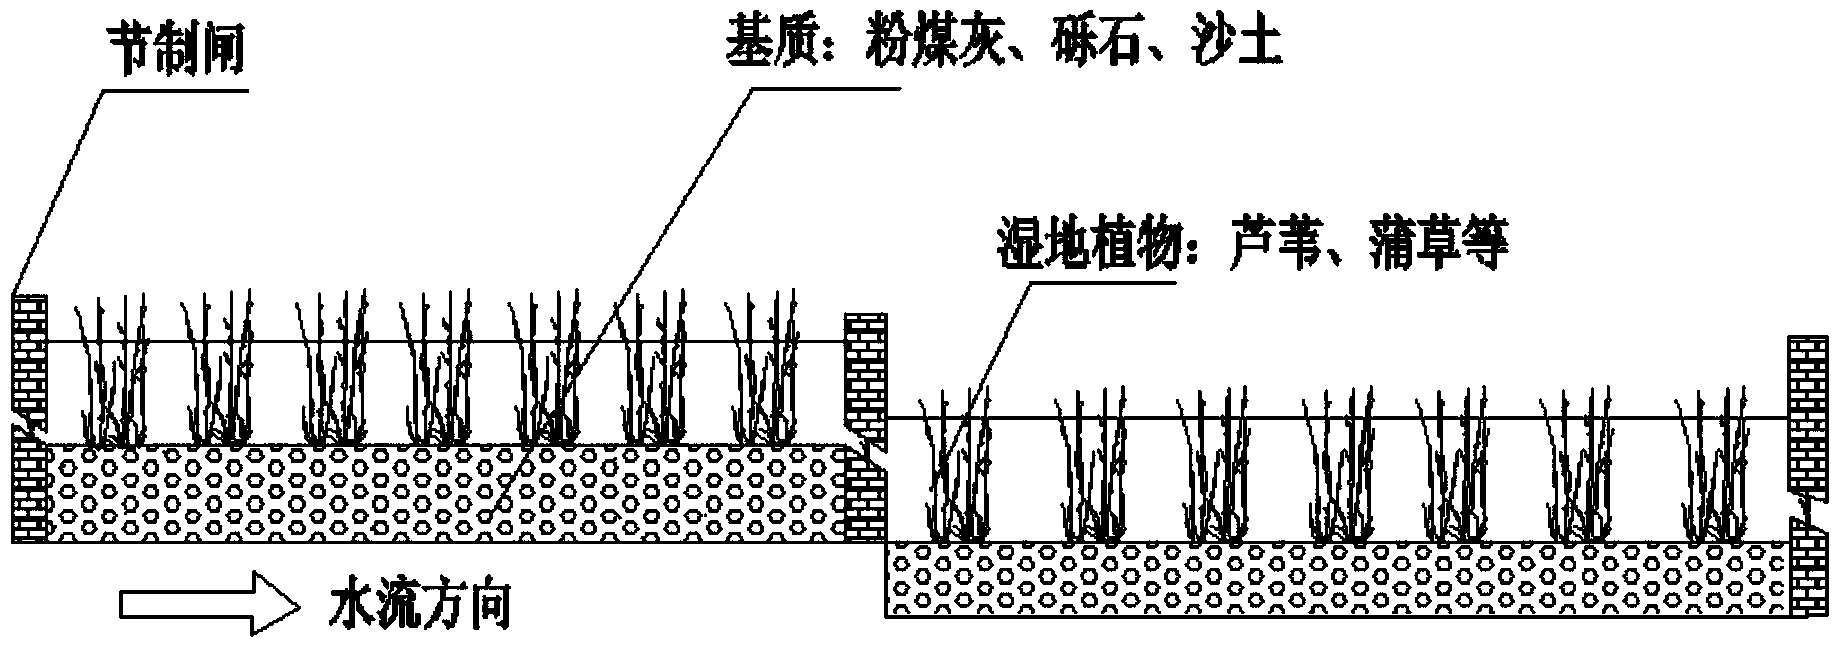 Method for water resource cascade adjustment control and water quality ecological purification in high groundwater level coal-mining subsidence area